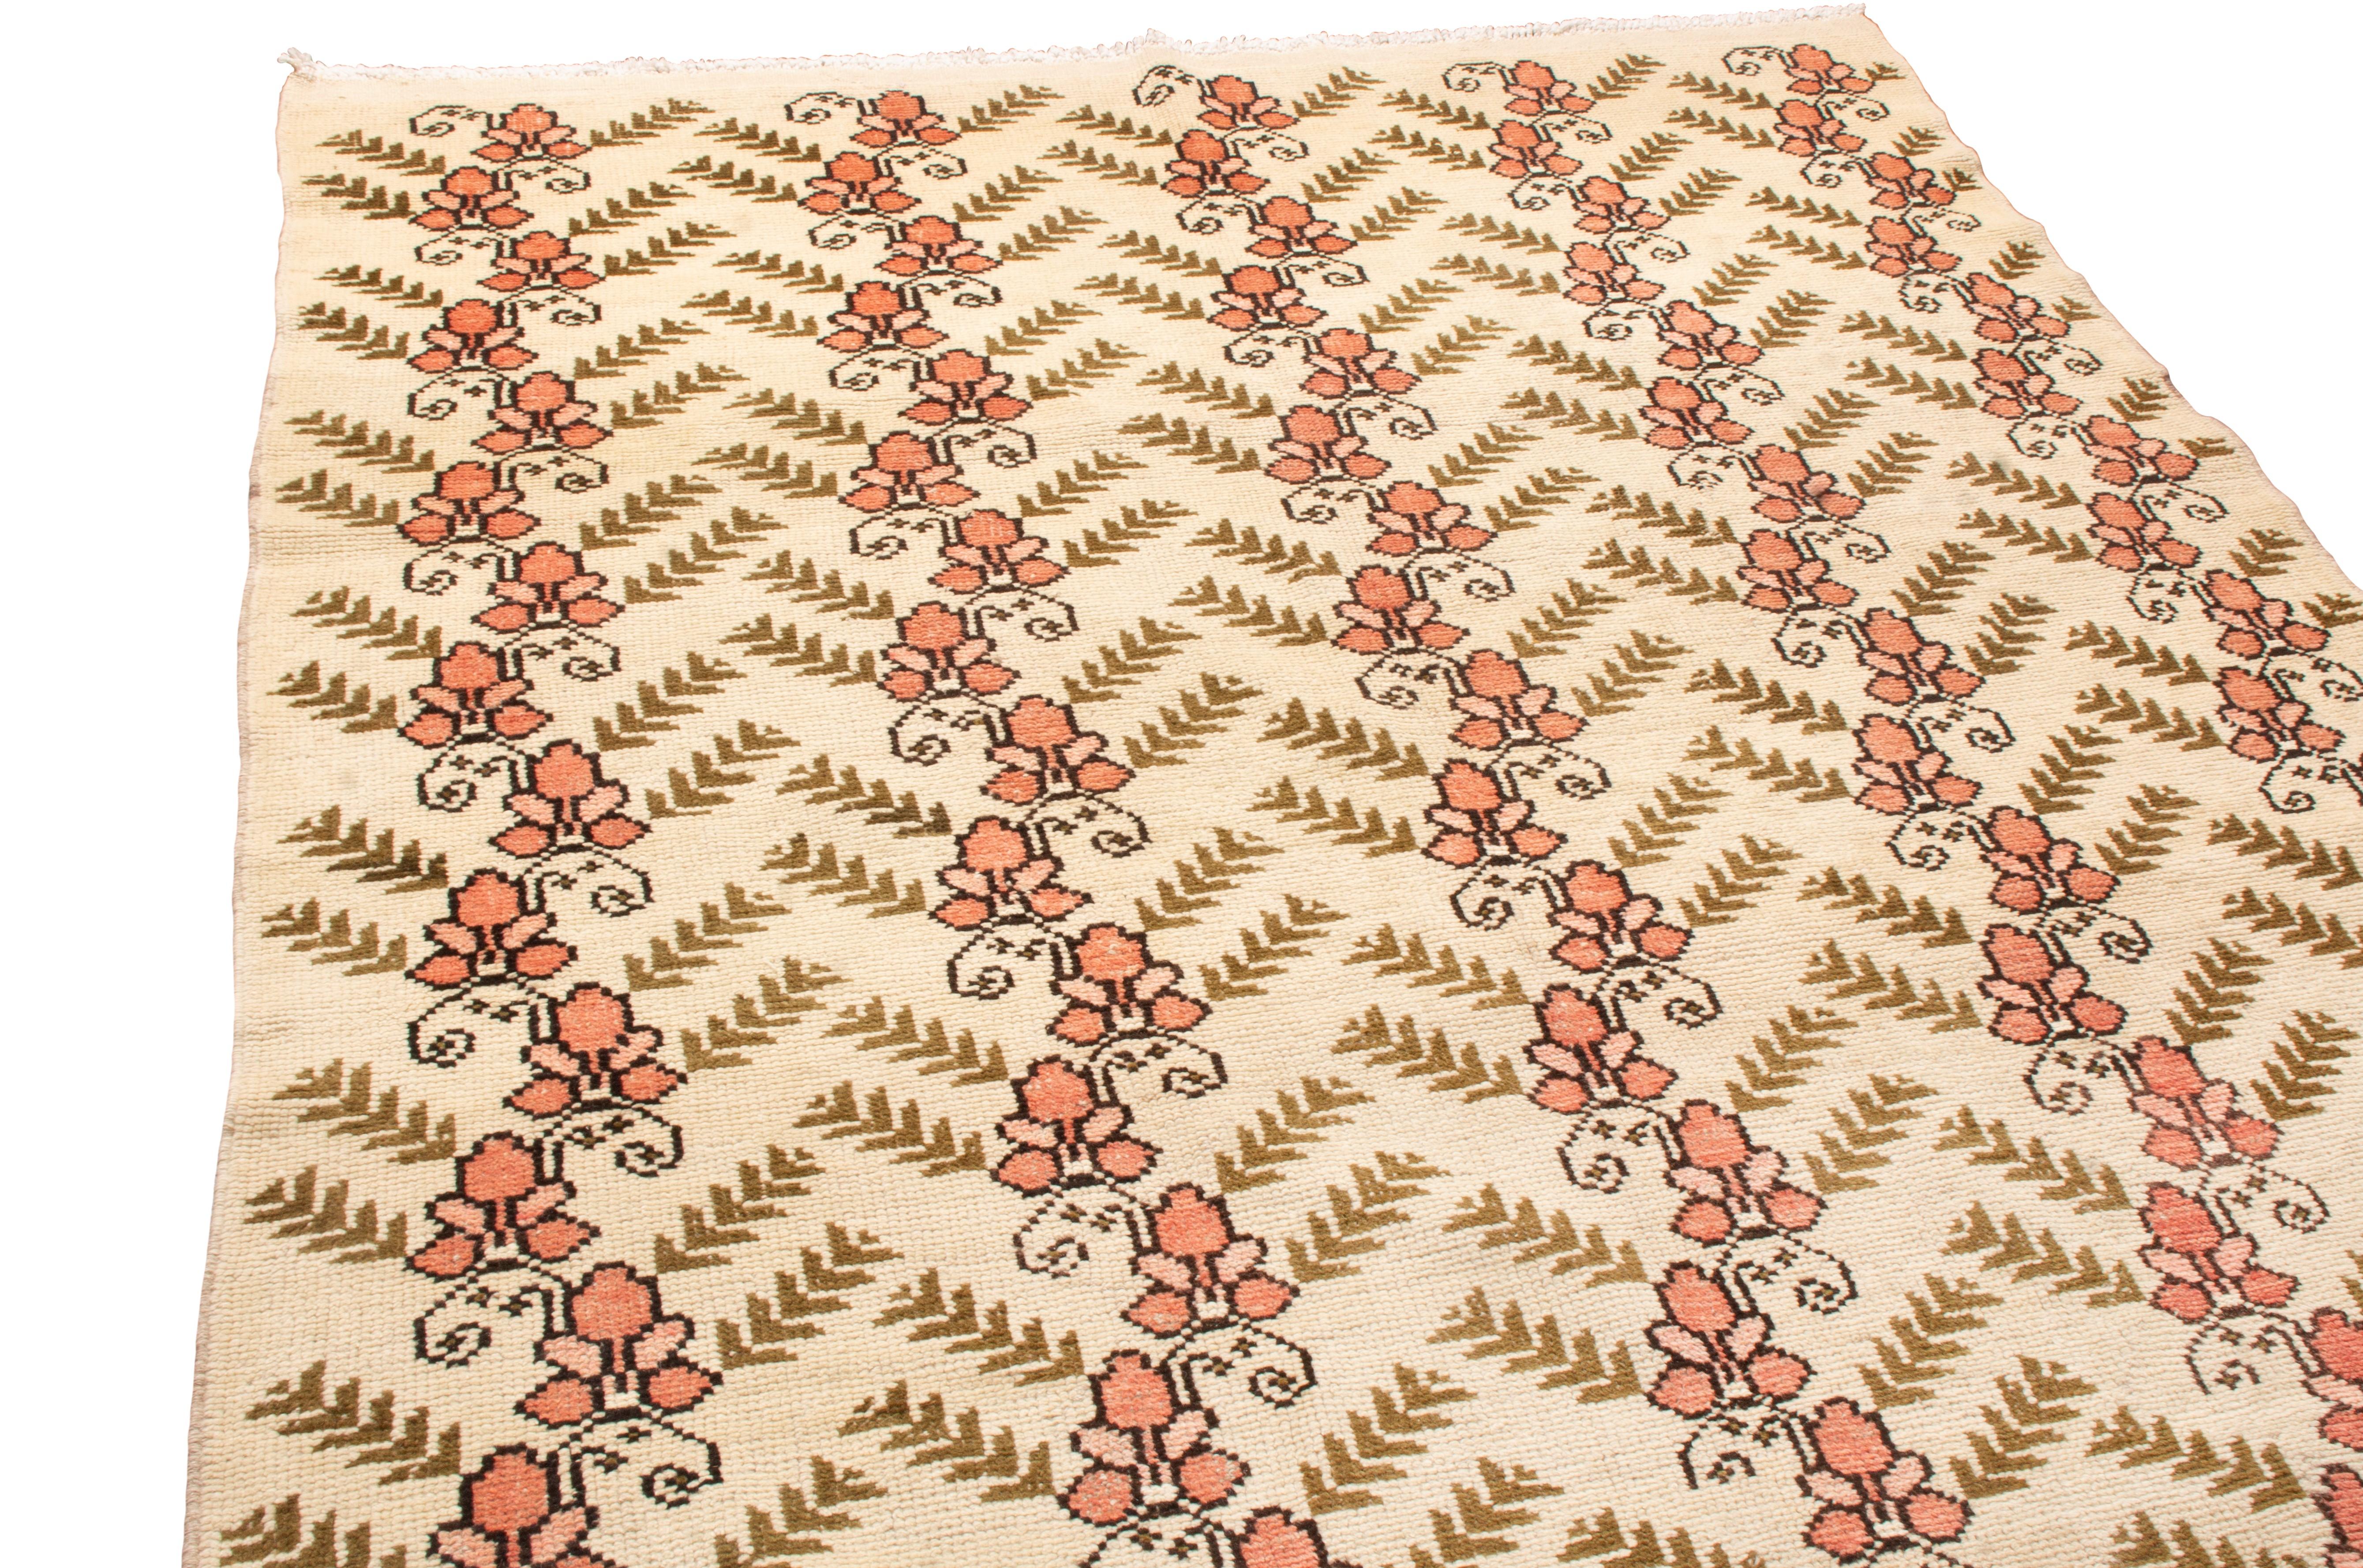 Originating from China in 1960, this vintage Sparta design wool rug employs a very uncommon contrast through color and texture together. Hand knotted in durable wool, the highly stylized blooming floral symbols in rustic pink are the only symbol in